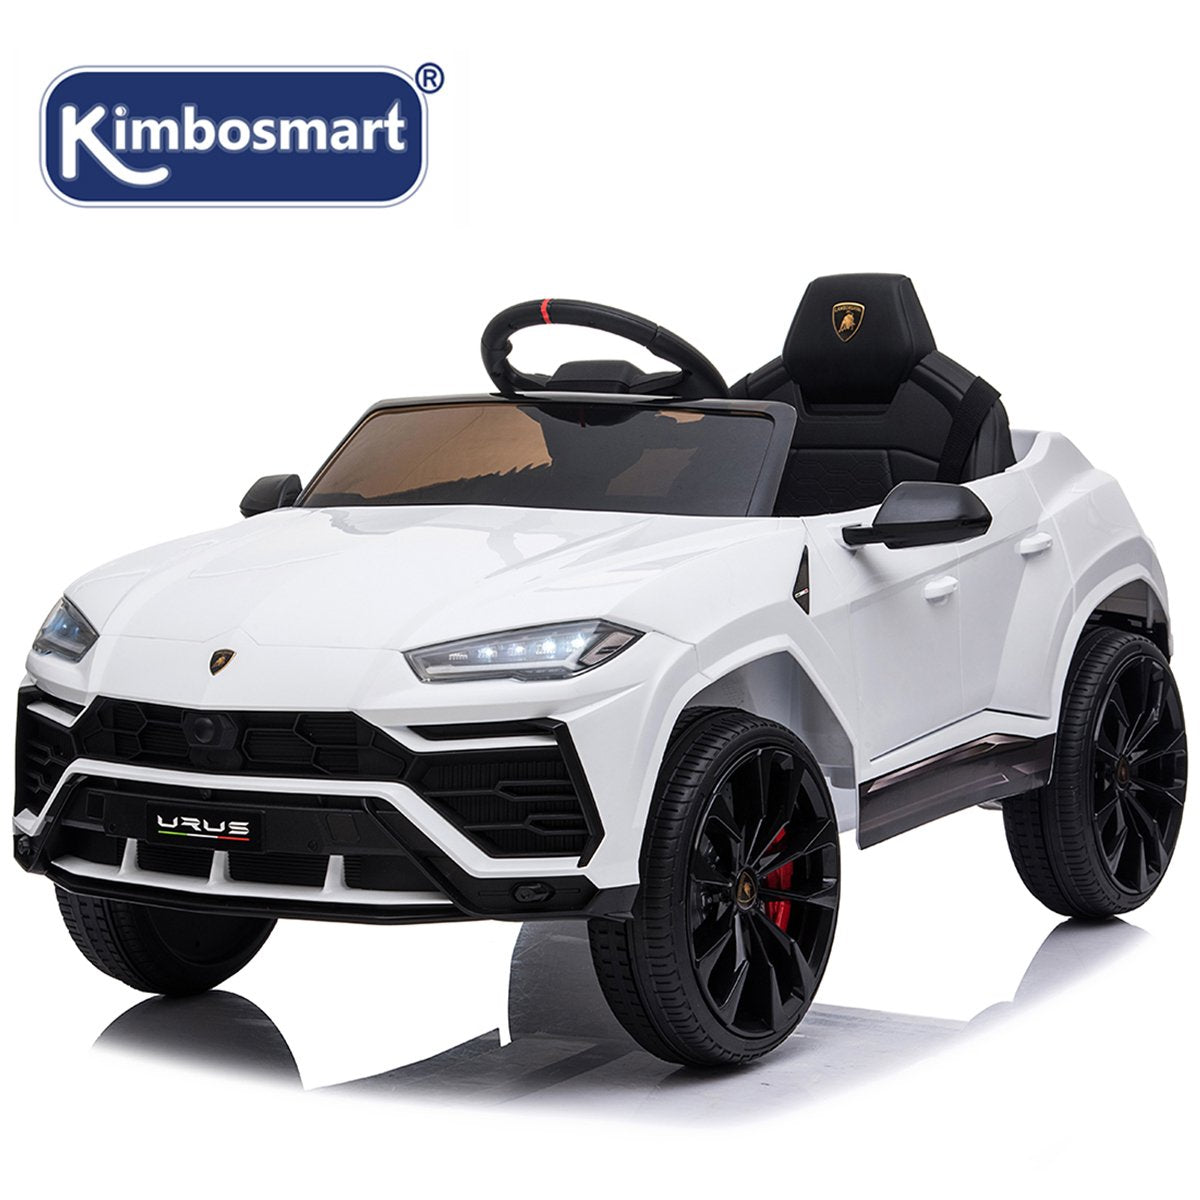 Kimbosmart®Toy Car for Kids Lamborghini Urus Electric Ride on Car with Remote Control 12V Electric 4 Wheels